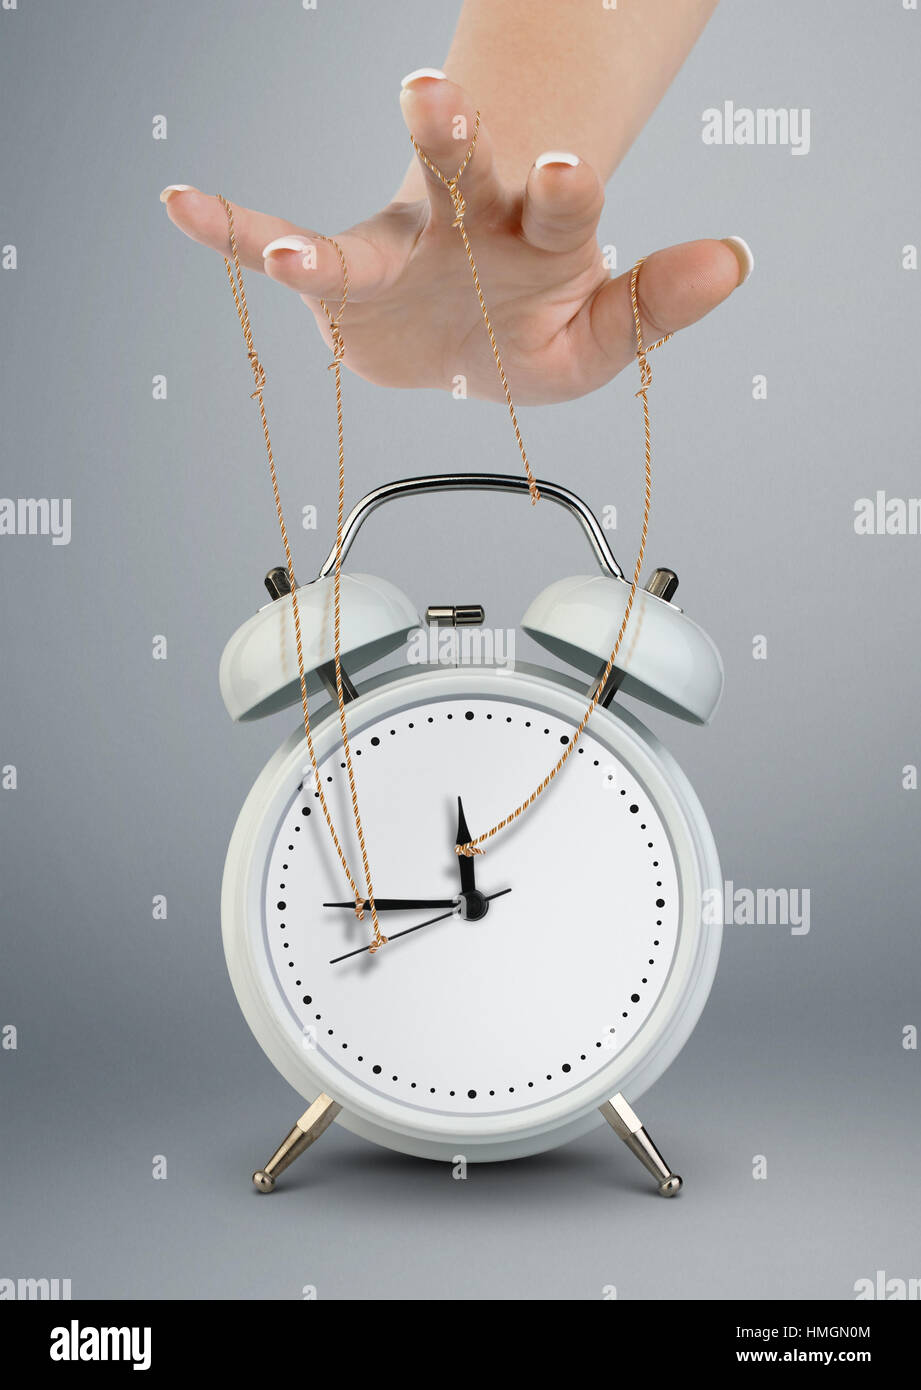 Hand puppeteer manipulating alarm clock, time management concept Stock Photo